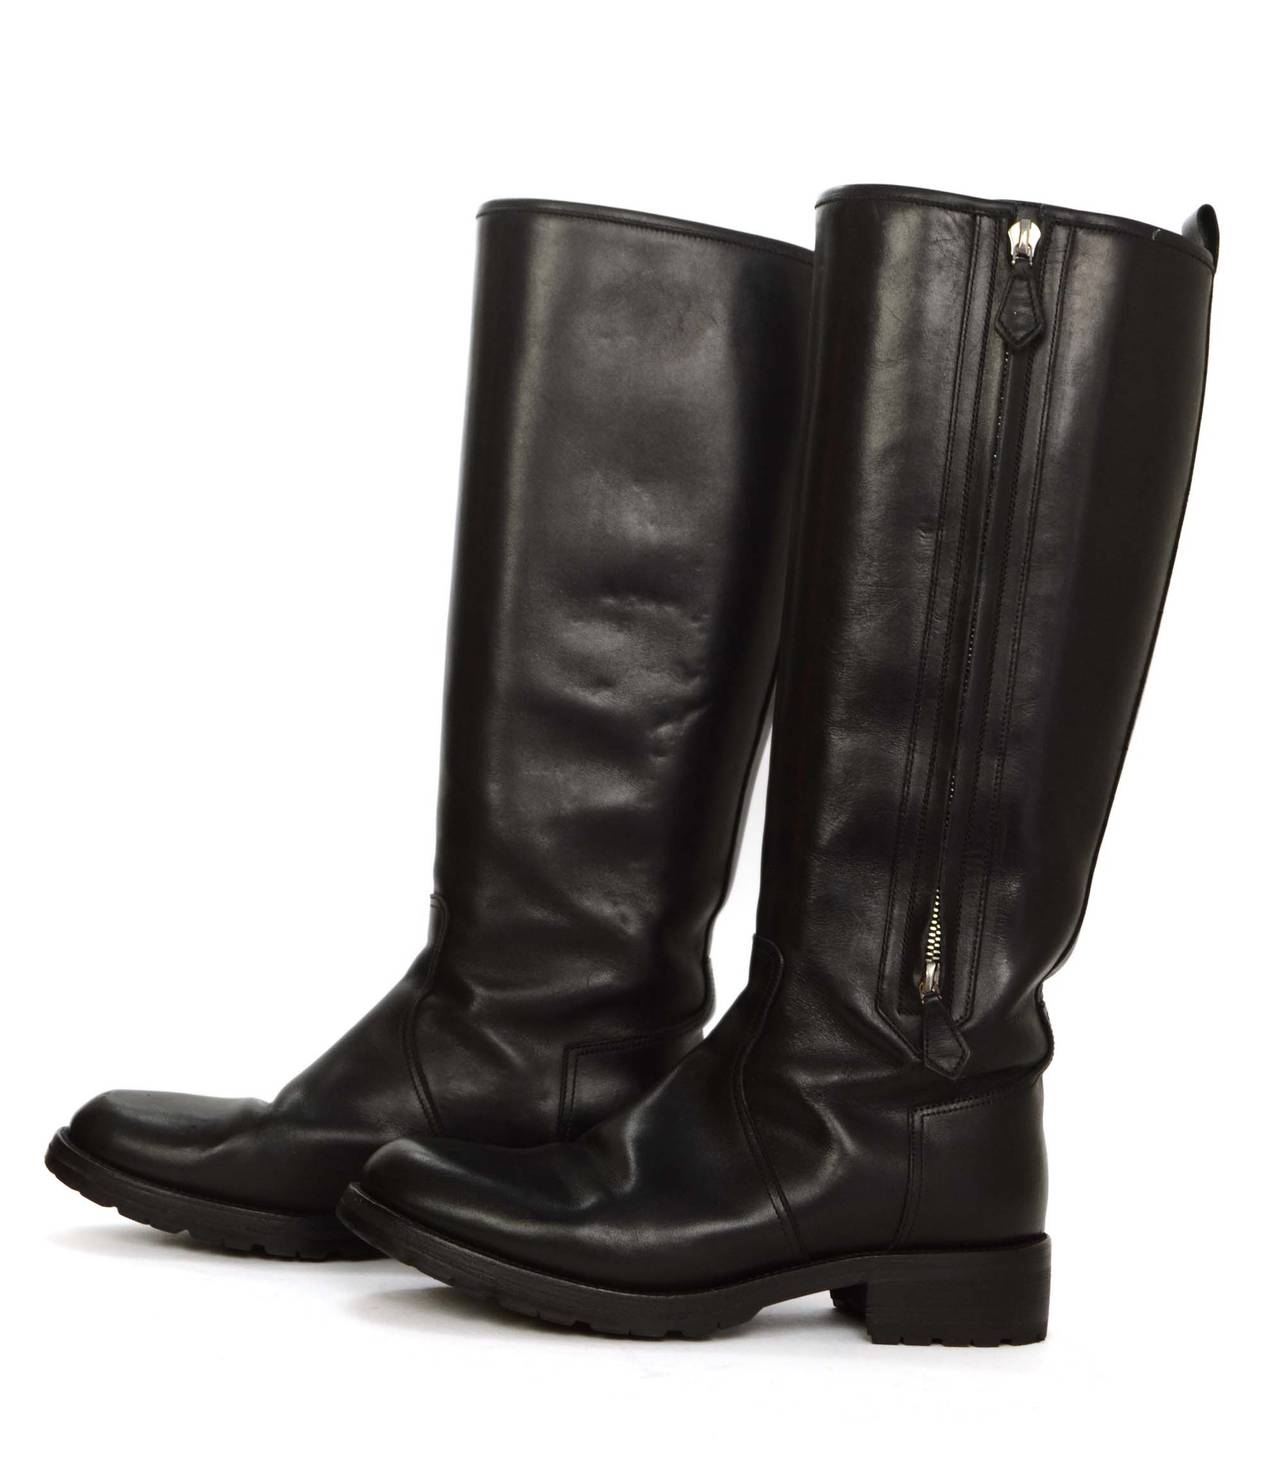 Hermes Black Leather Tall Riding Boots
Made in: Italy
Color: Black
Composition: Leather
Sole Stamp: Hermes Made in Italy
Closure/opening: Interior side zipper
Overall Condition: Excellent pre-owned condition with the exception of some scuffs